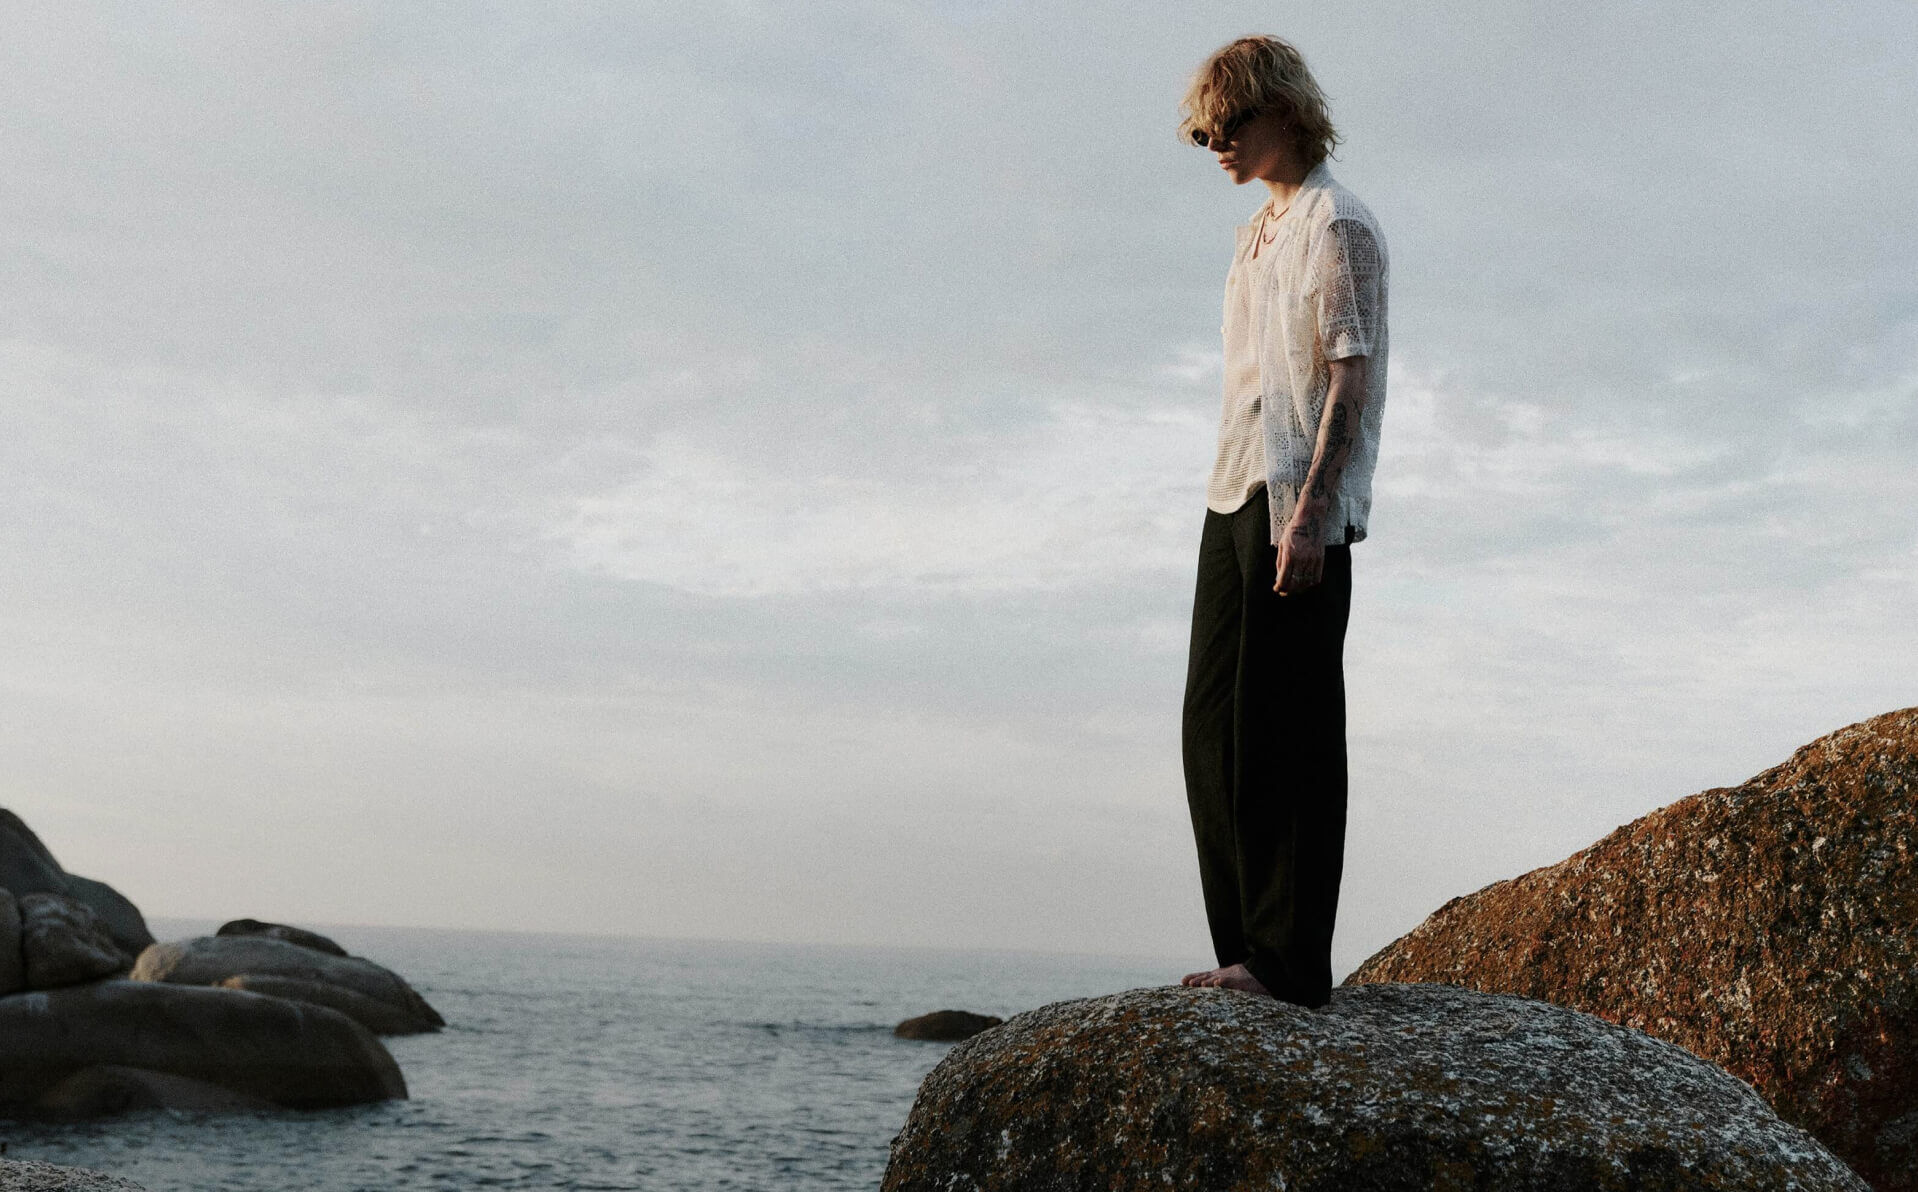 Man wearing white shirt and black trousers standing on a boulder by the sea